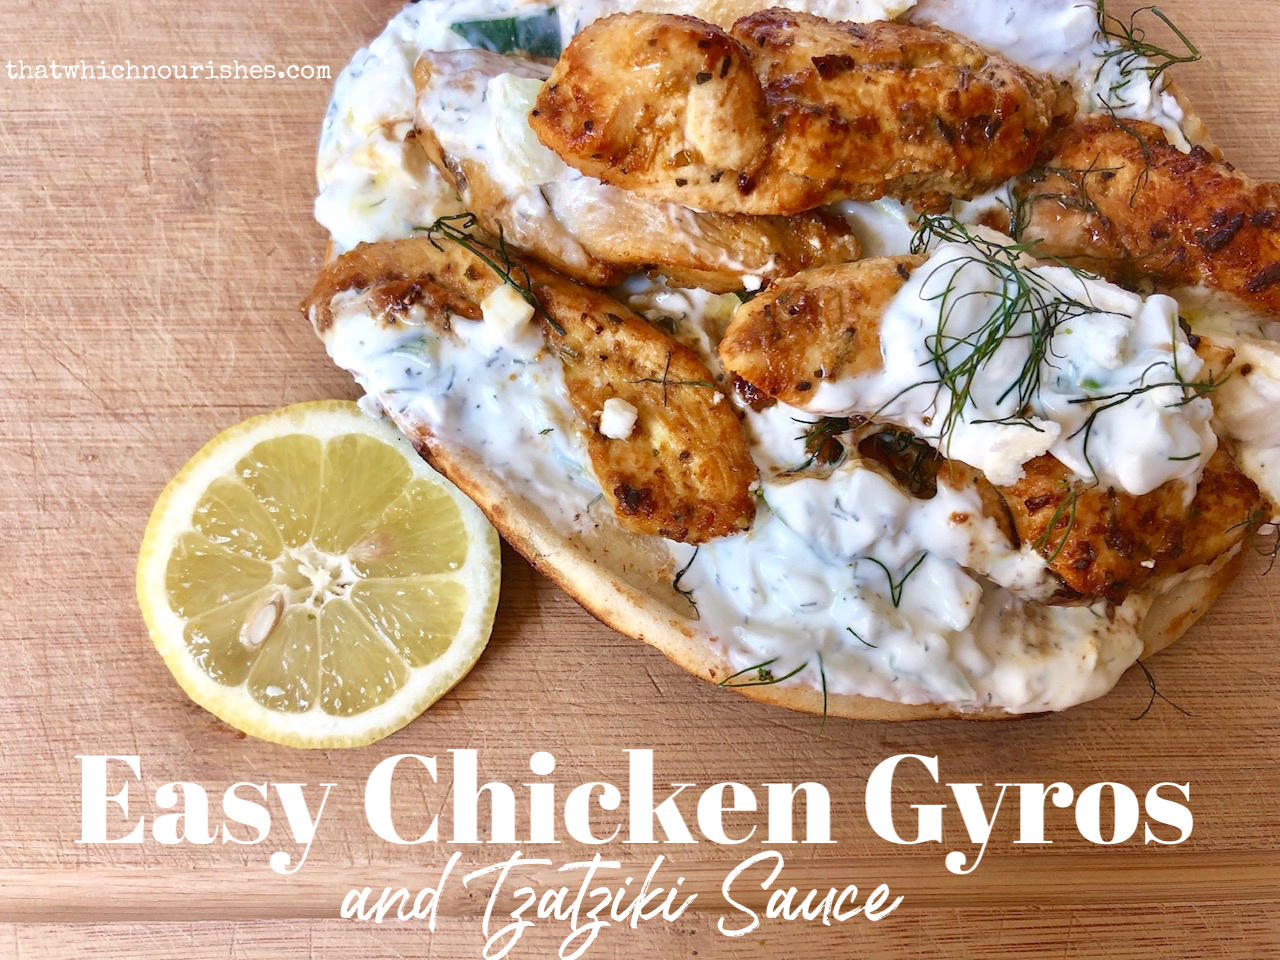 Easy Chicken Gyros and Tzatziki Sauce -- Marinated chicken piled on naan bread and blanketed with homemade tzatziki sauce loaded with garlic, dill, and cucumbers and then covered in rich feta. | thatwhichnourishes.com